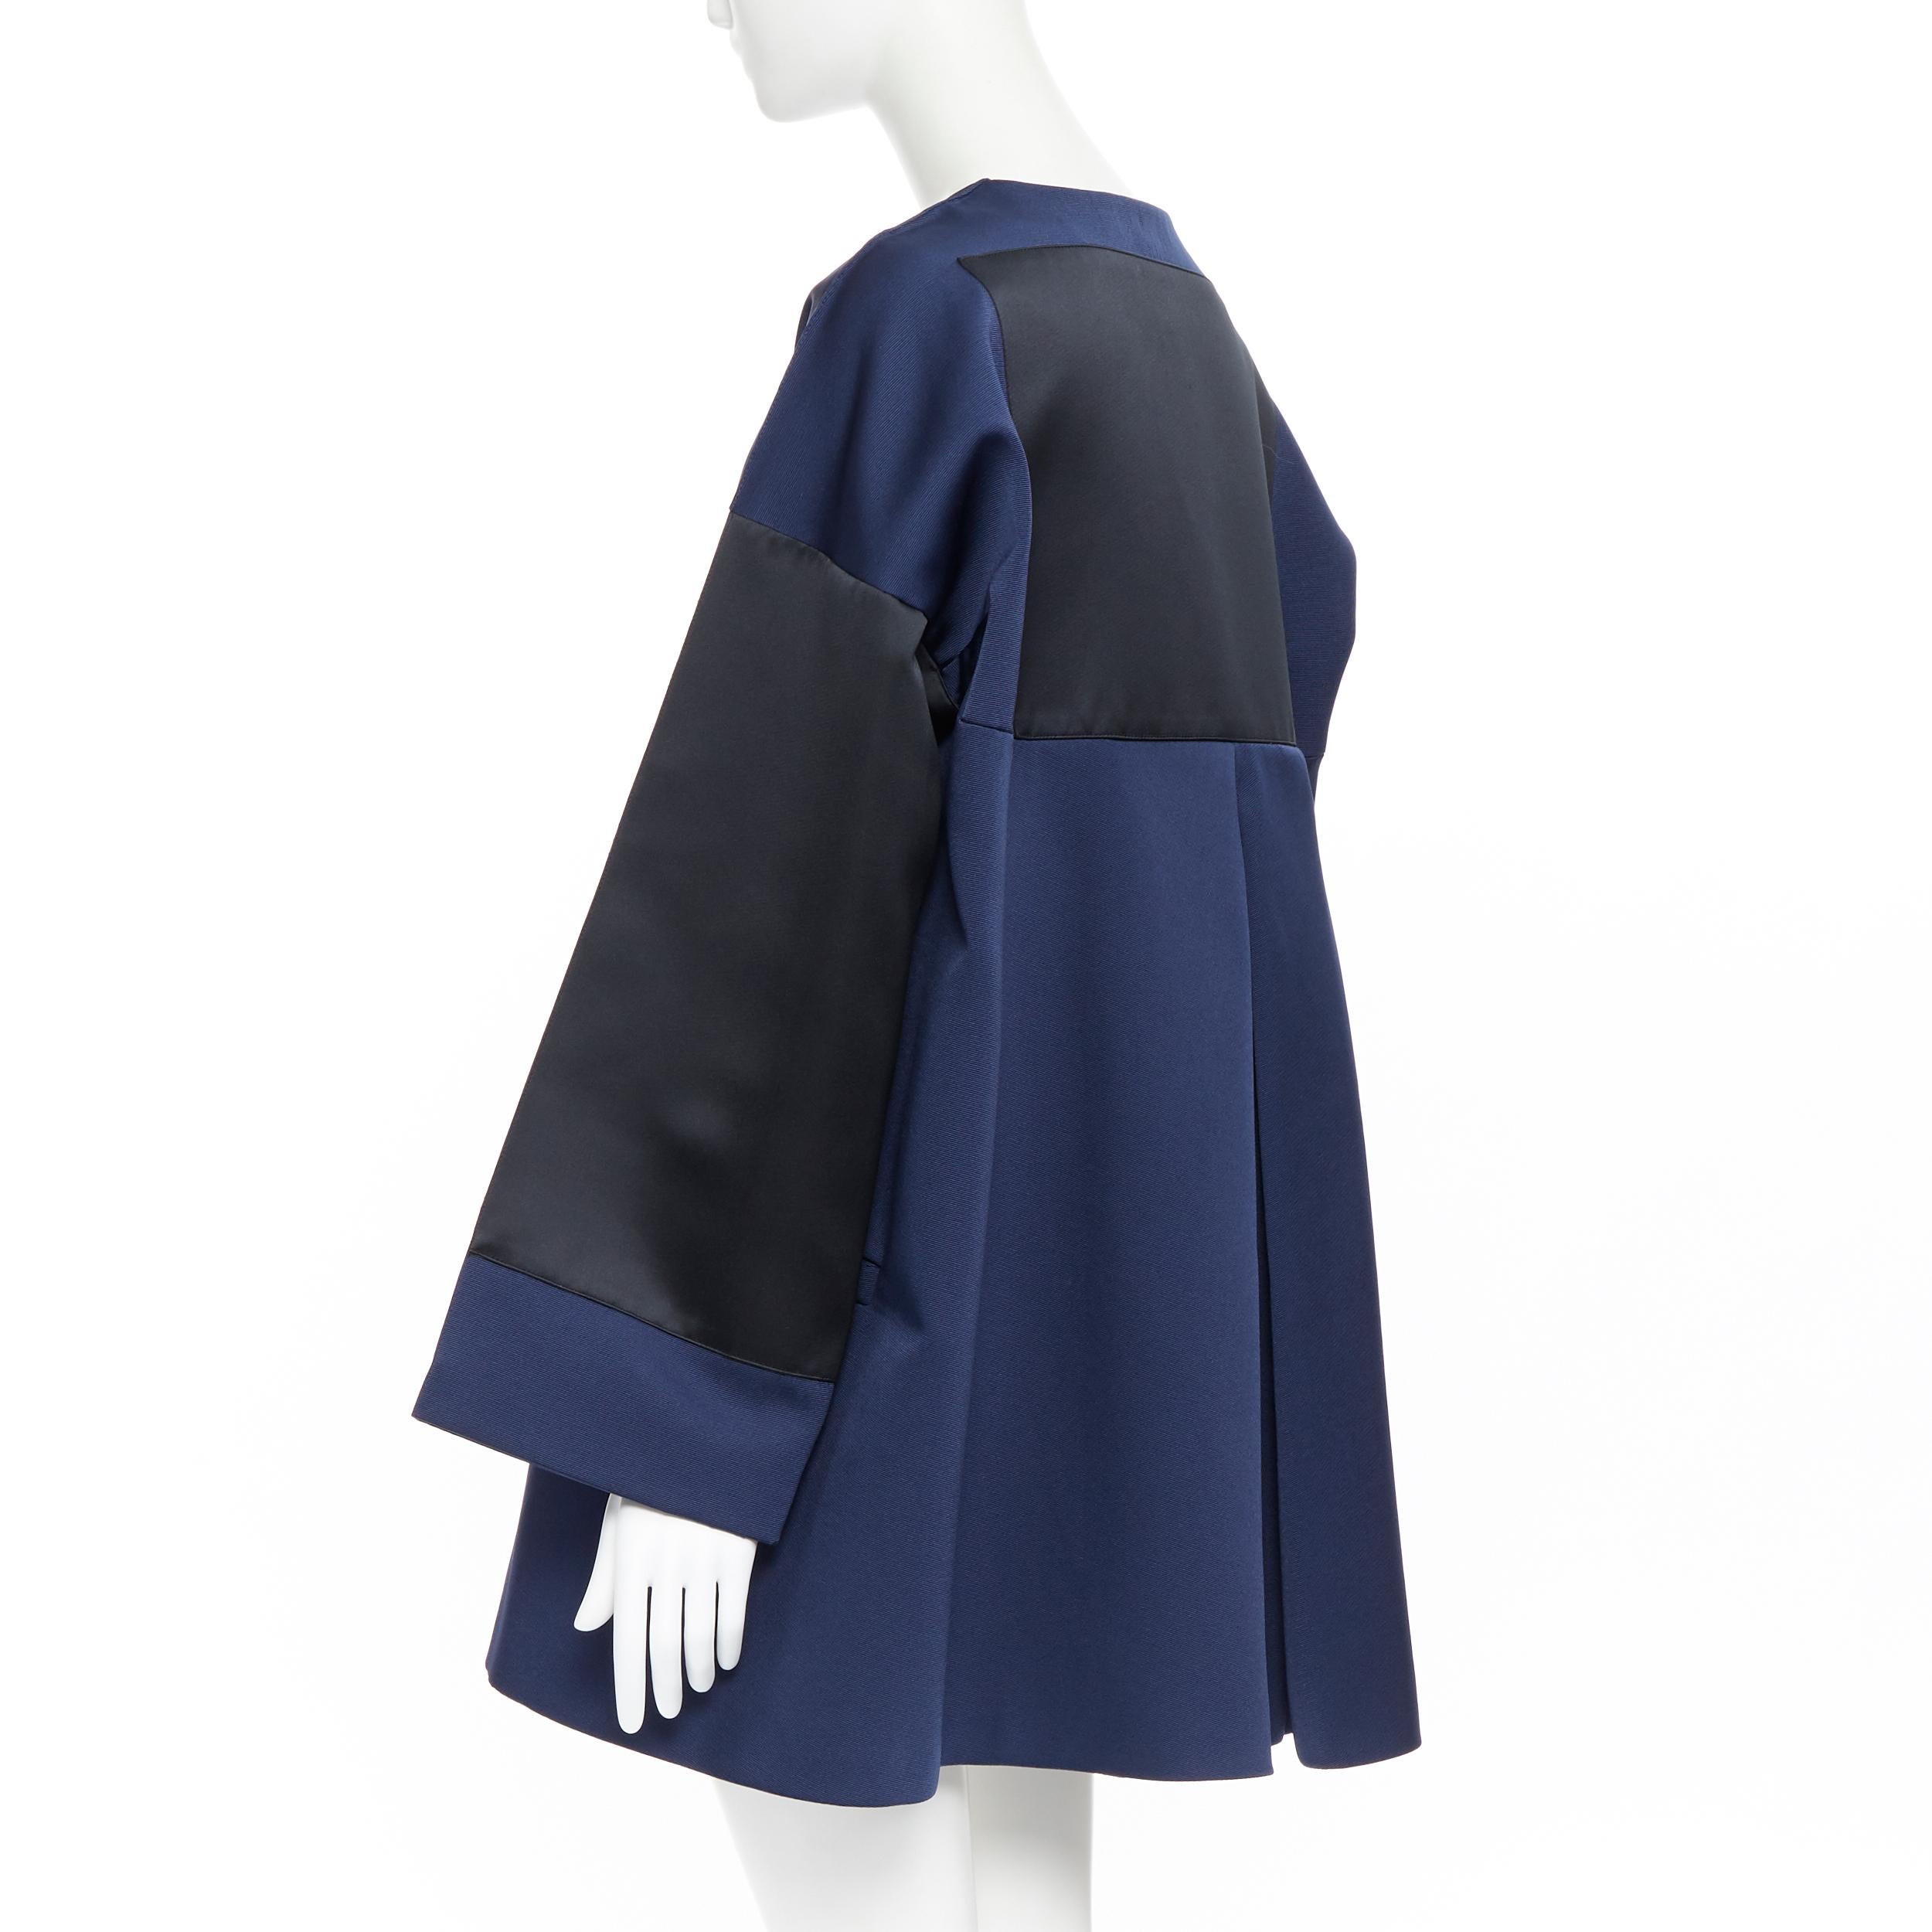 BALENCIAGA 2012 Ghesquiere navy black colorblocked structured cocoon coat FR40
Brand: Balenciaga
Designer: Nicolas Ghesquiere
Collection: 2012
Model Name / Style: Cocoon coat
Material: Polyester blend
Color: Navy
Pattern: Solid
Closure: Hook &